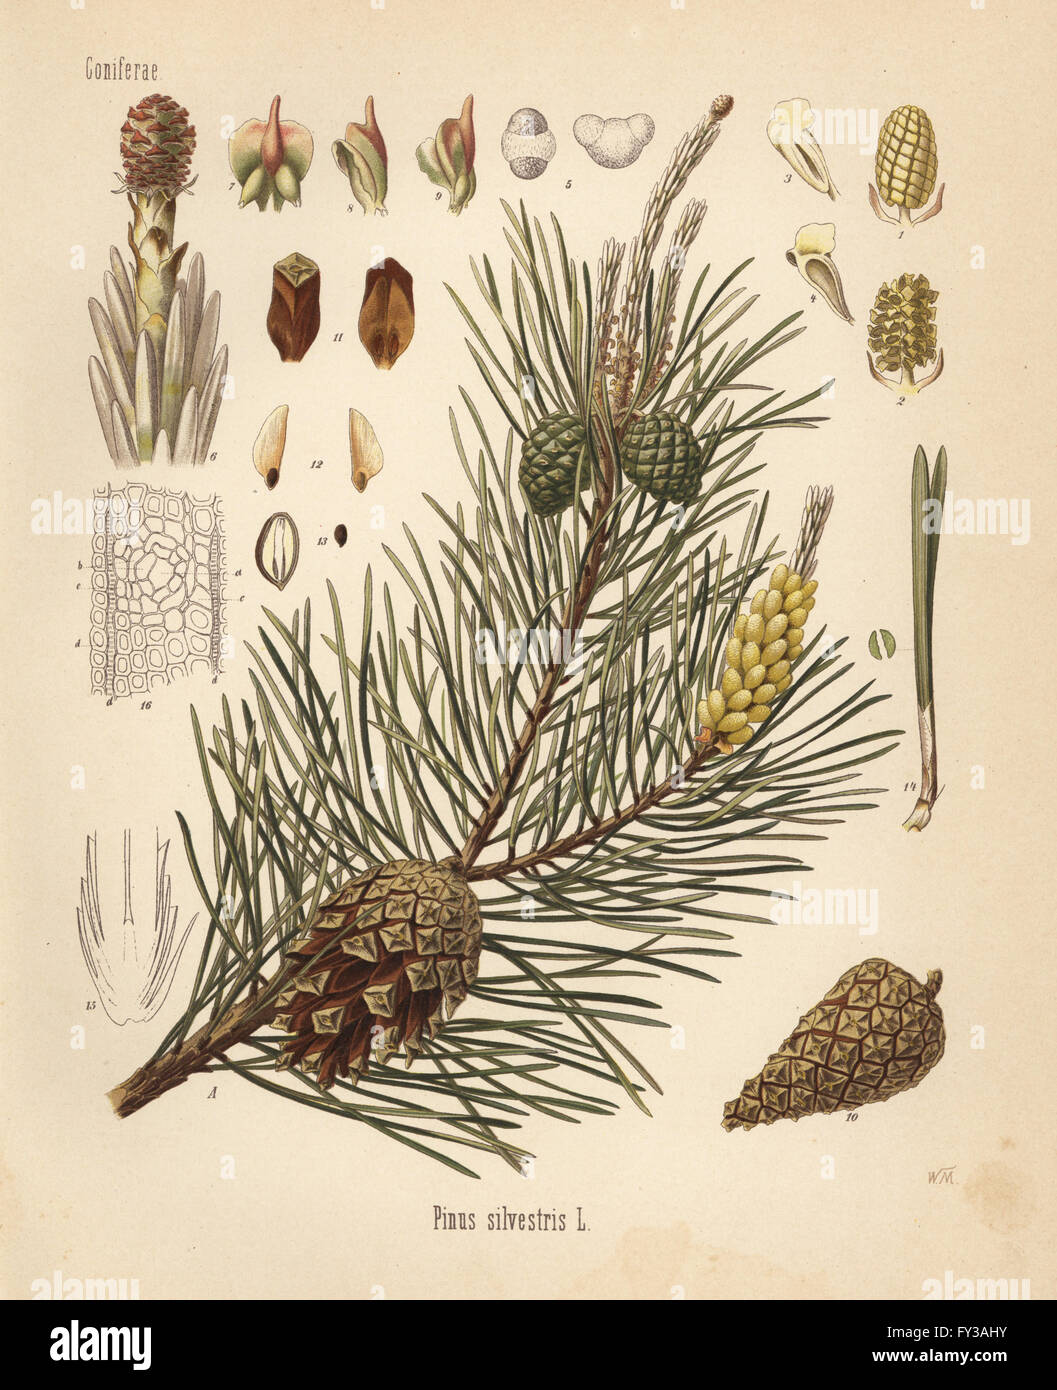 Scotch pine or Scots pine, Pinus sylvestris. Chromolithograph after a botanical illustration by Walther Muller from Hermann Adolph Koehler's Medicinal Plants, edited by Gustav Pabst, Koehler, Germany, 1887. Stock Photo